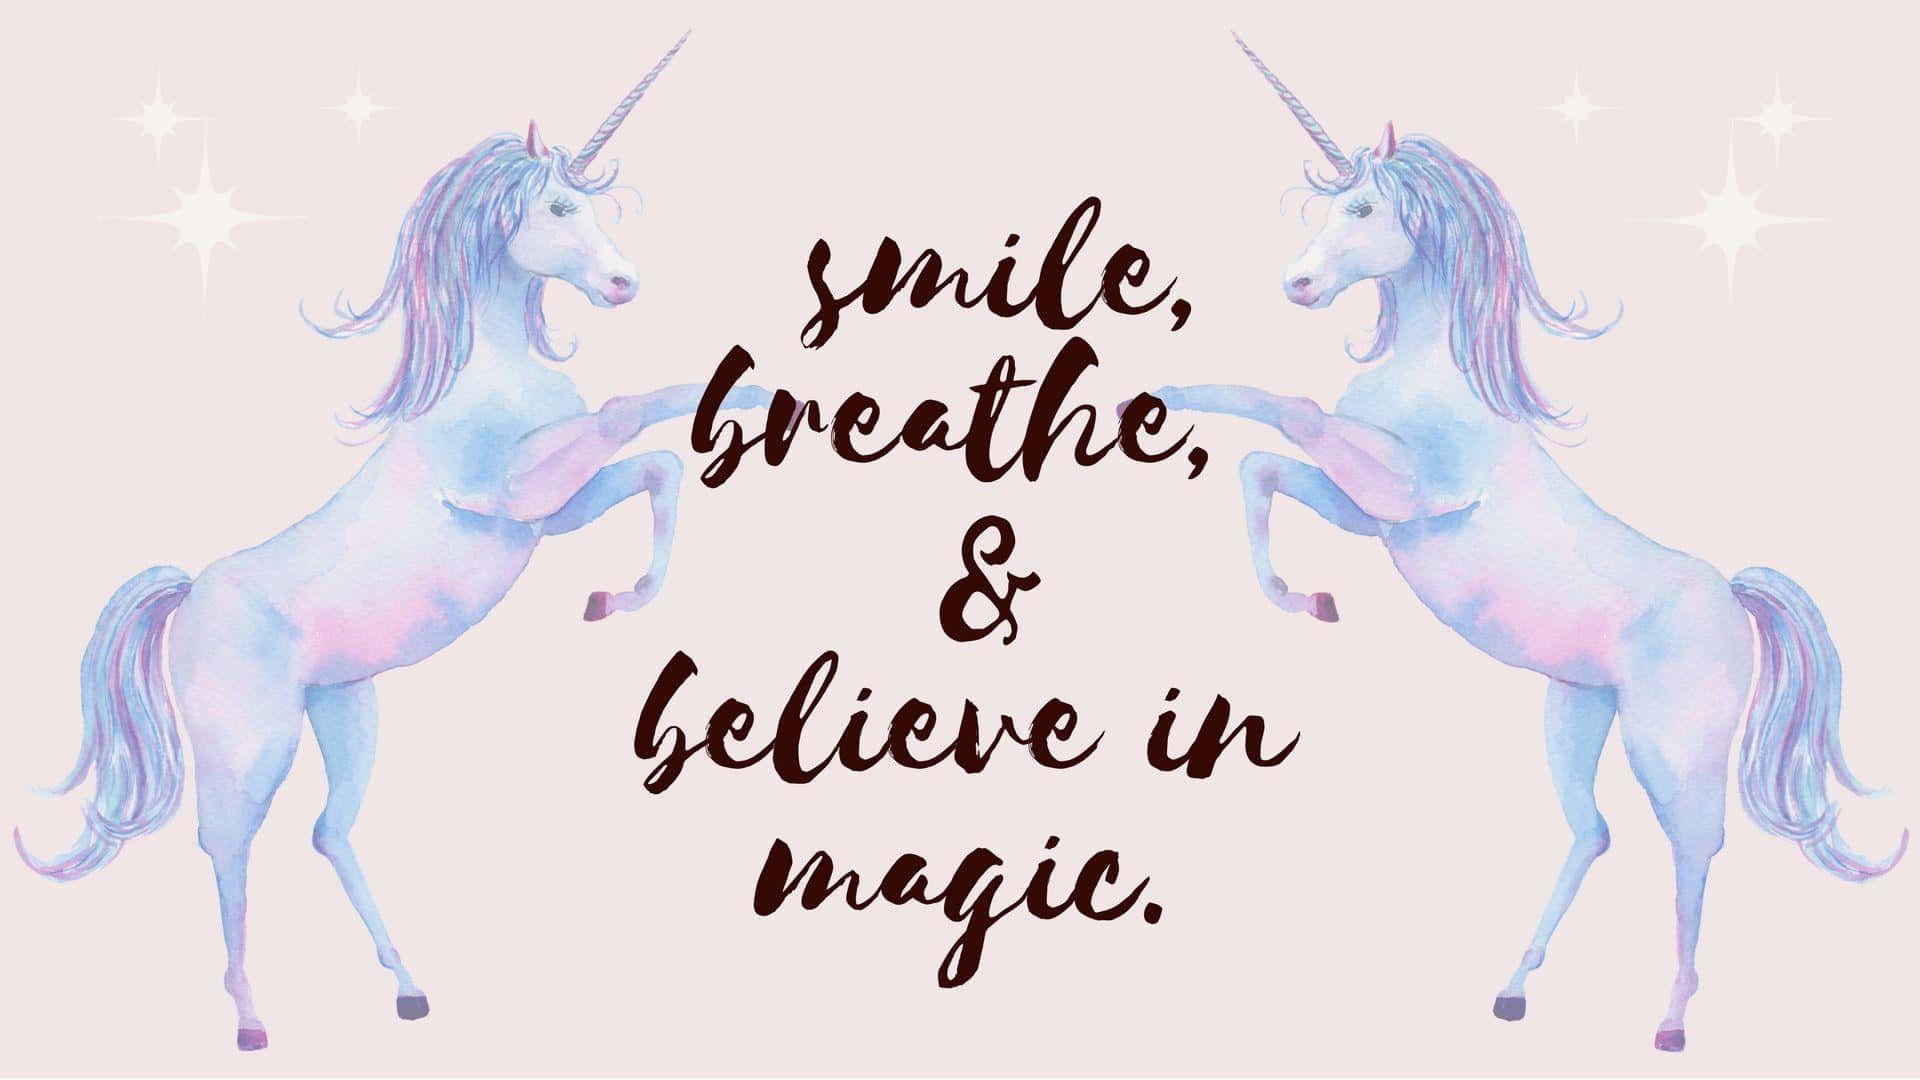 Spread Love And Glamour With This Beautiful Unicorn Aesthetic! Wallpaper